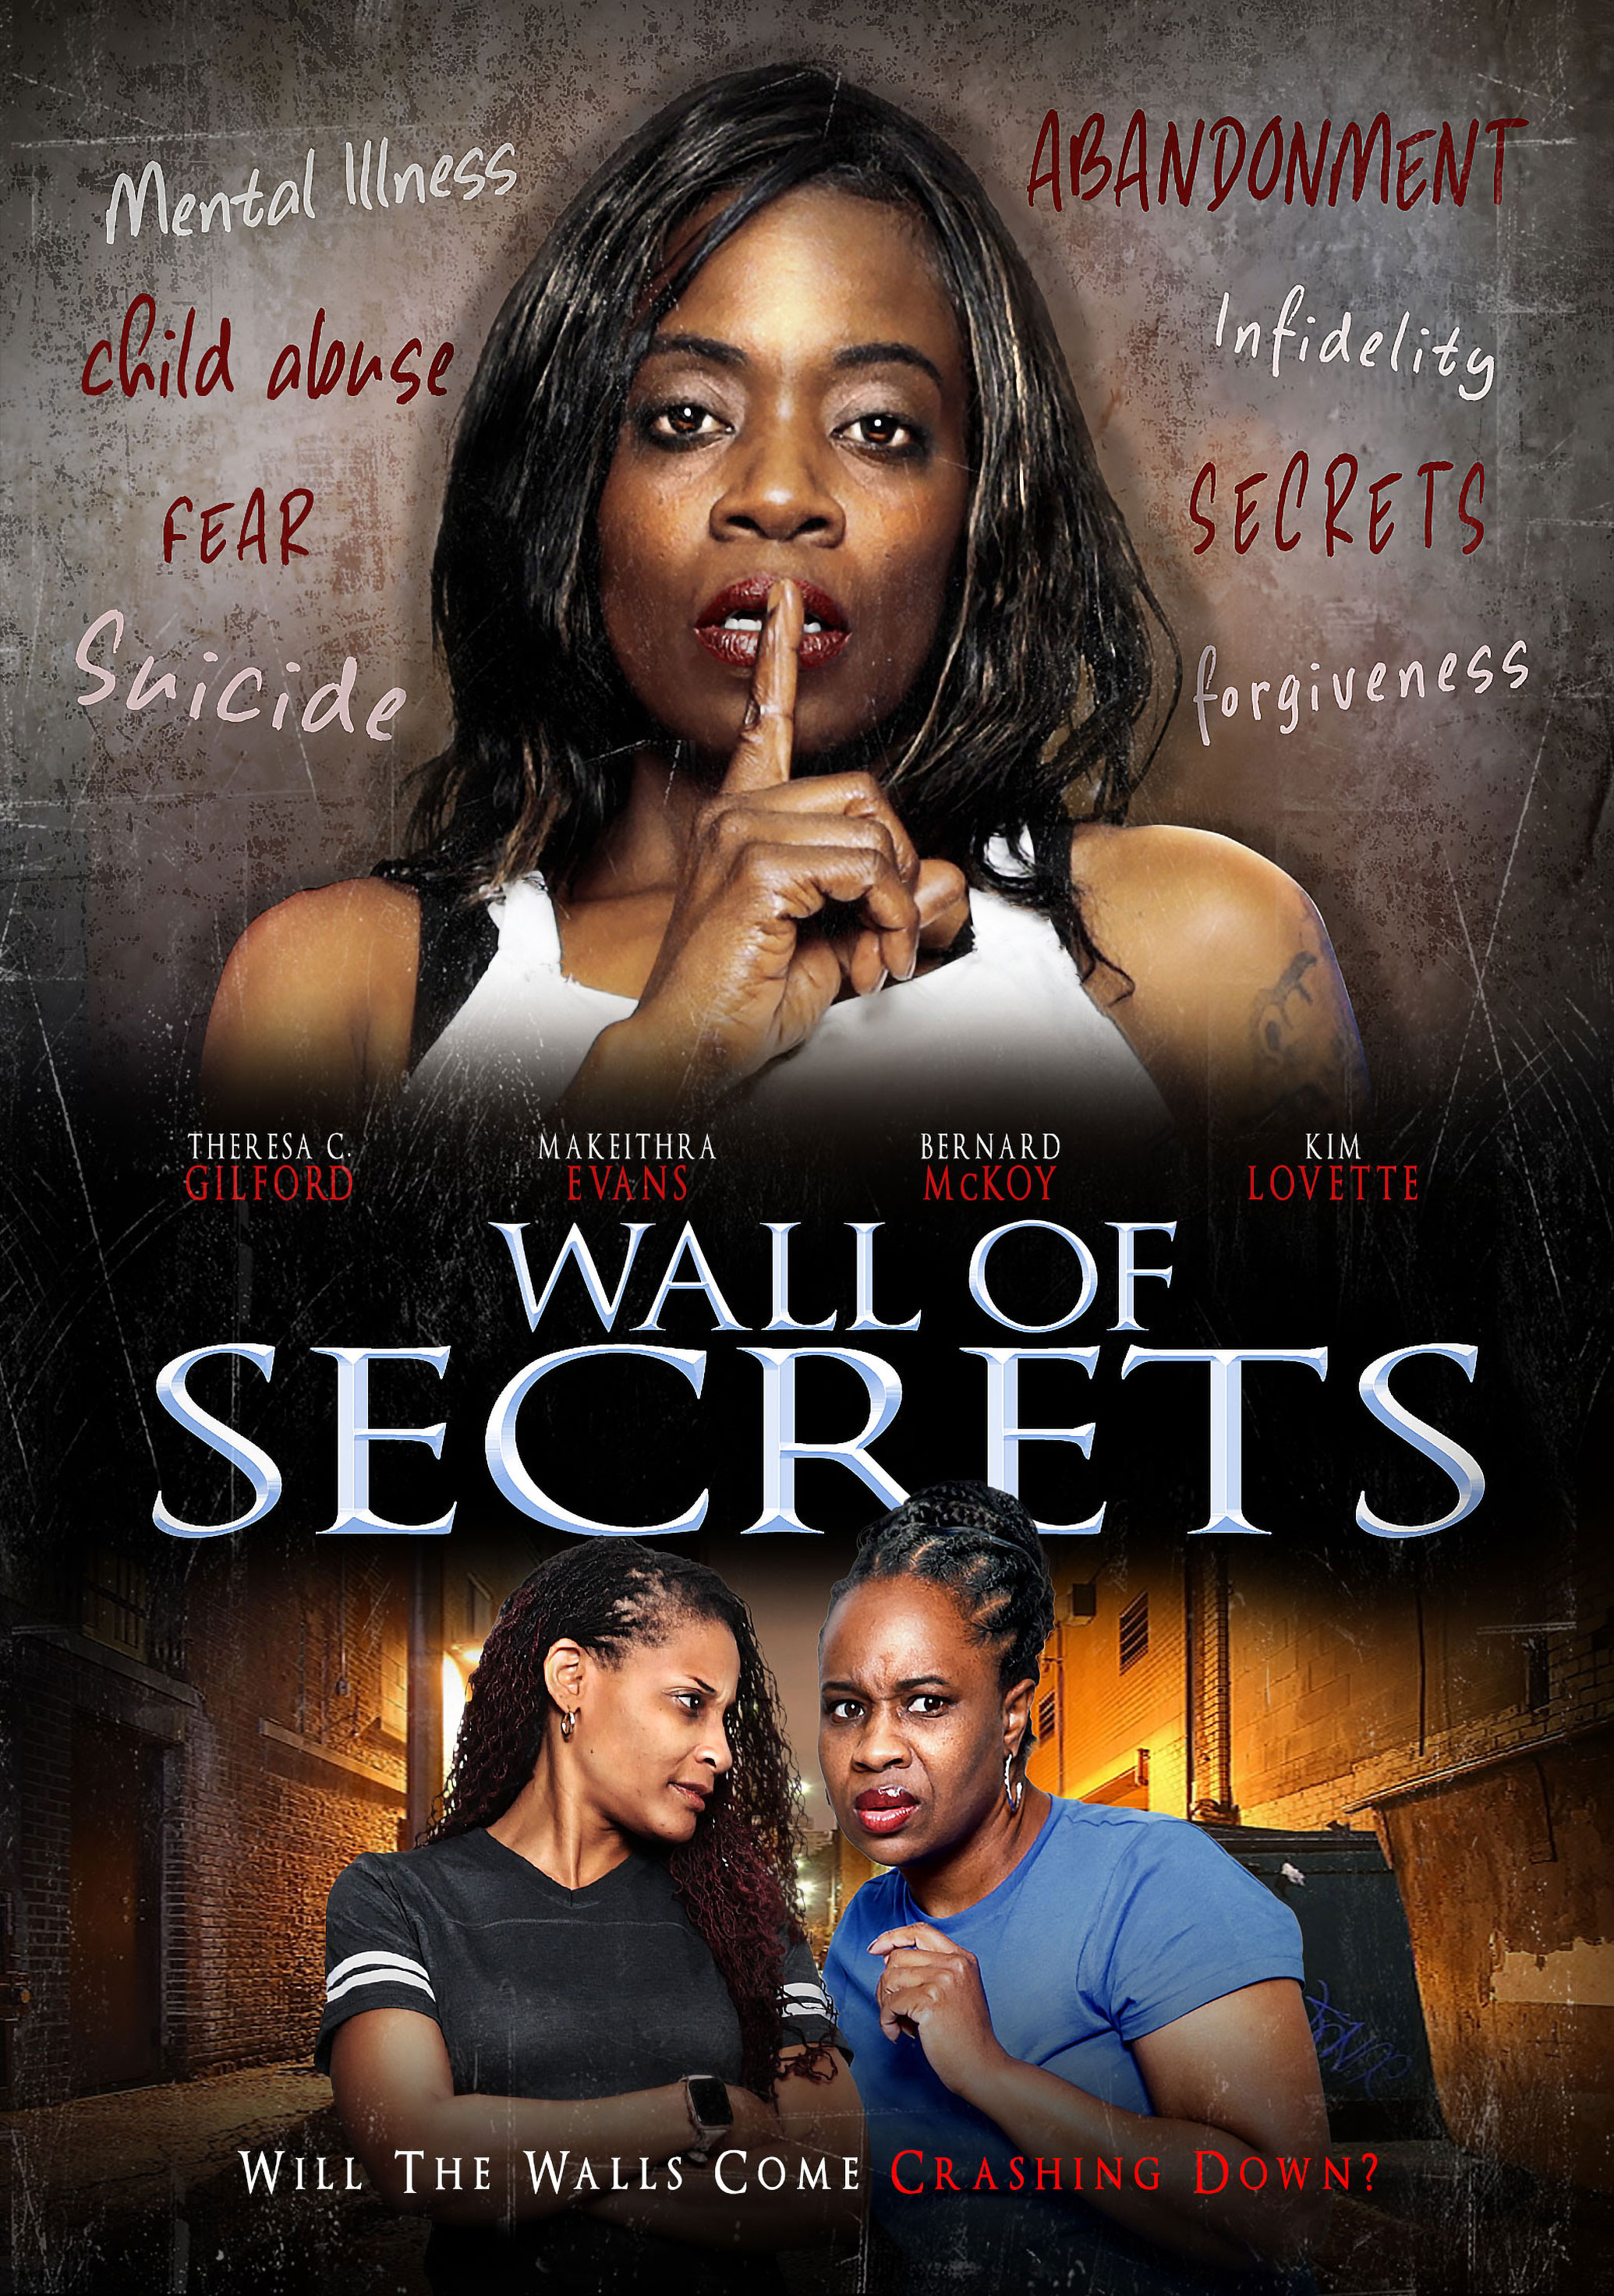 Wall of Secrets (2021) Drama, Directed By Theresa C